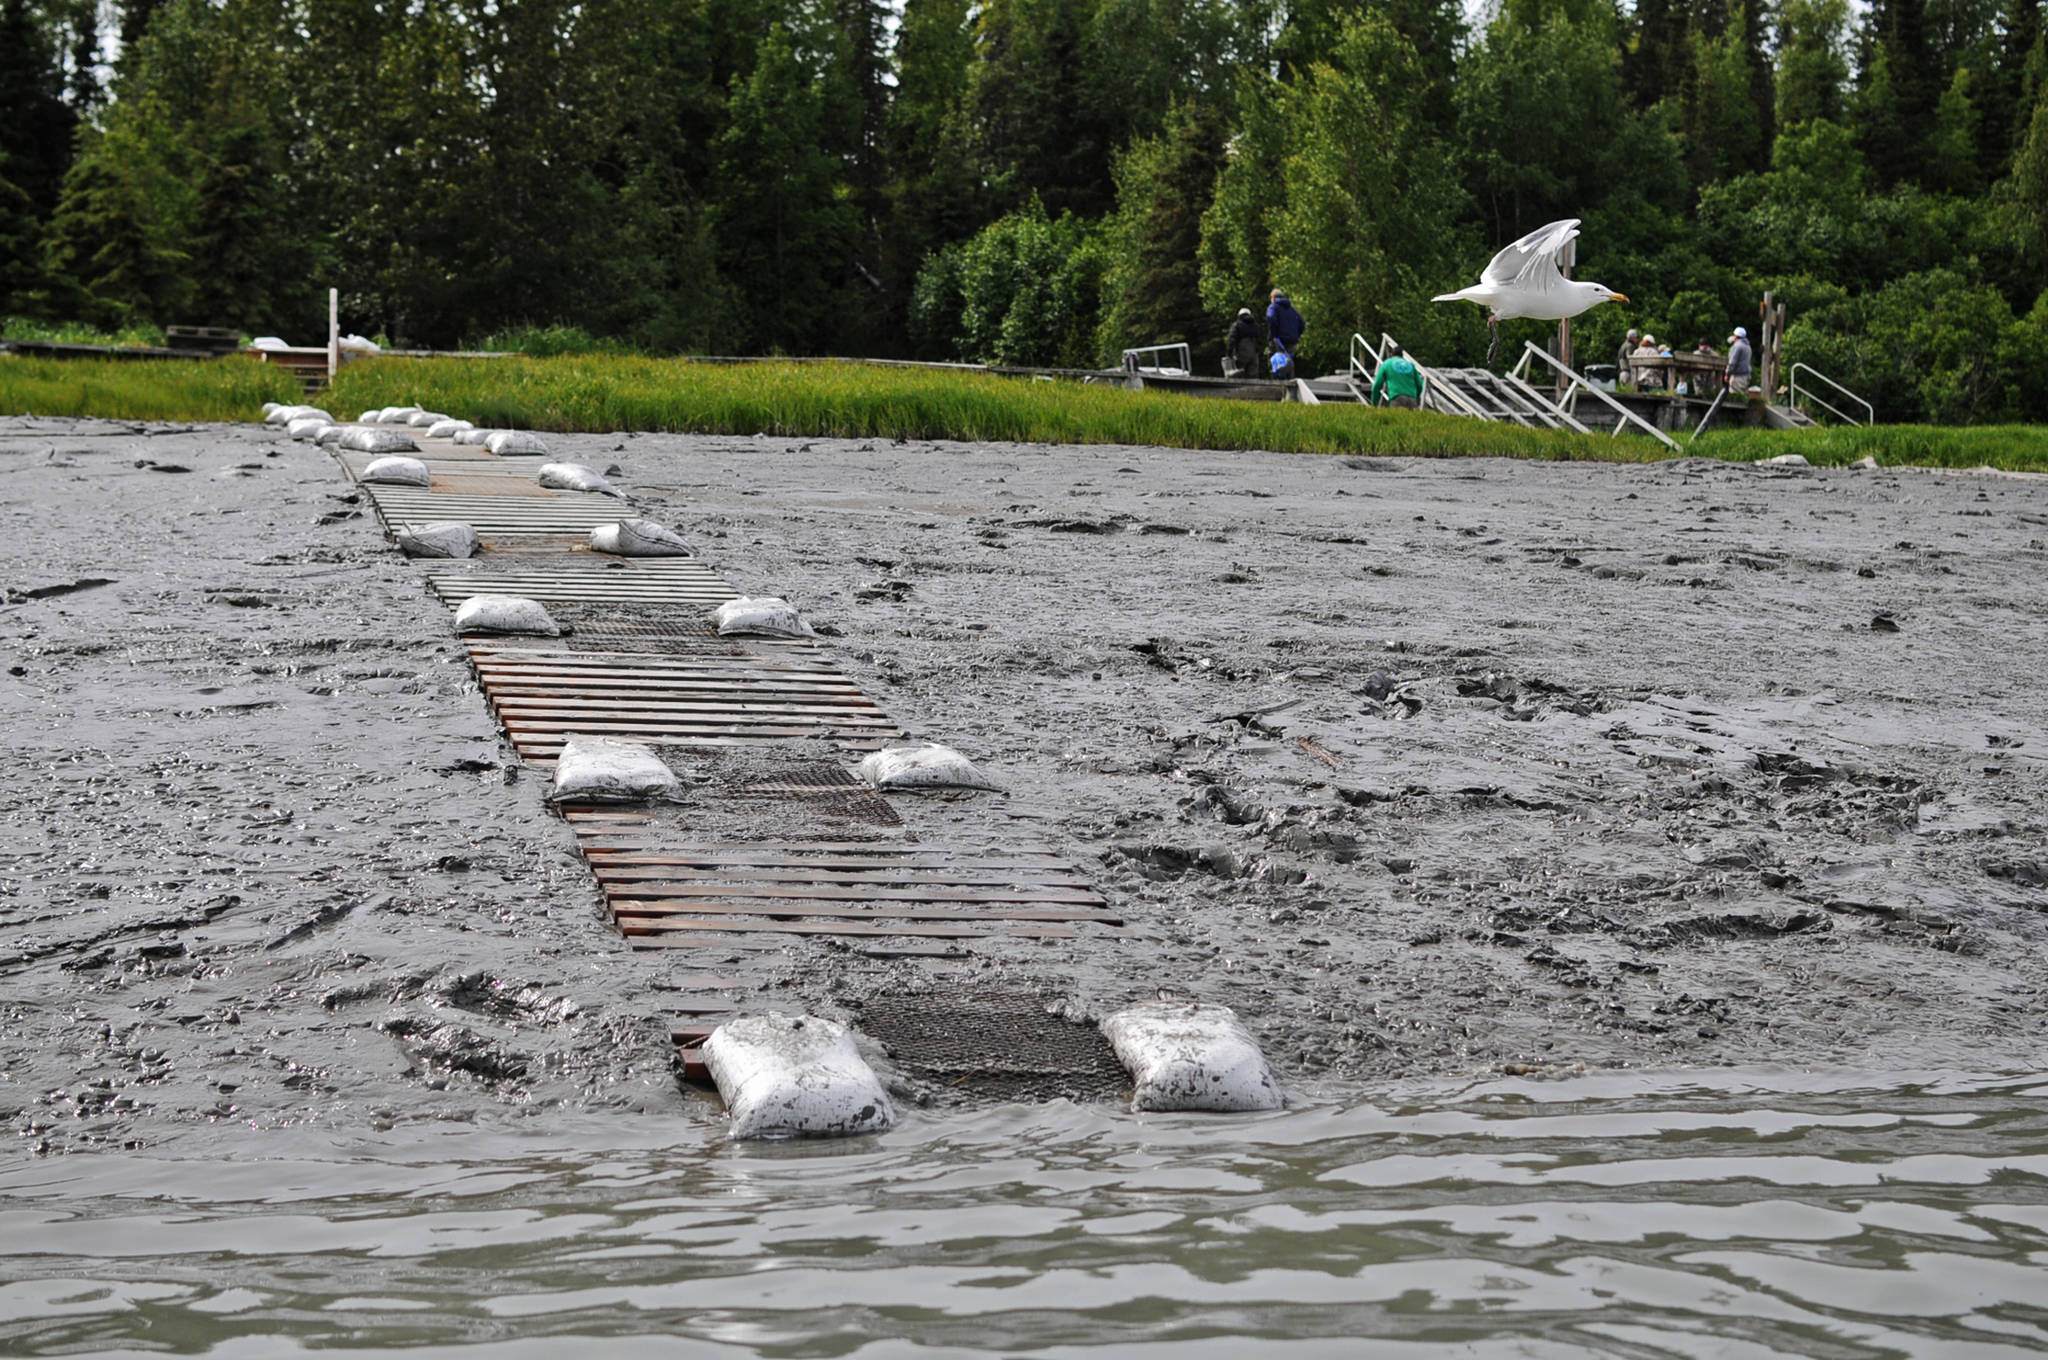 A sandbagged walkway runs alongside the boat takeout ramp at the Kasilof River Lodge and Cabins on the lower Kasilof River on Monday, June 19, 2017 in Kasilof, Alaska. The lodge has the only legal takeout facility for drift boats on the lower Kasilof River. (Photo by Elizabeth Earl/Peninsula Clarion)